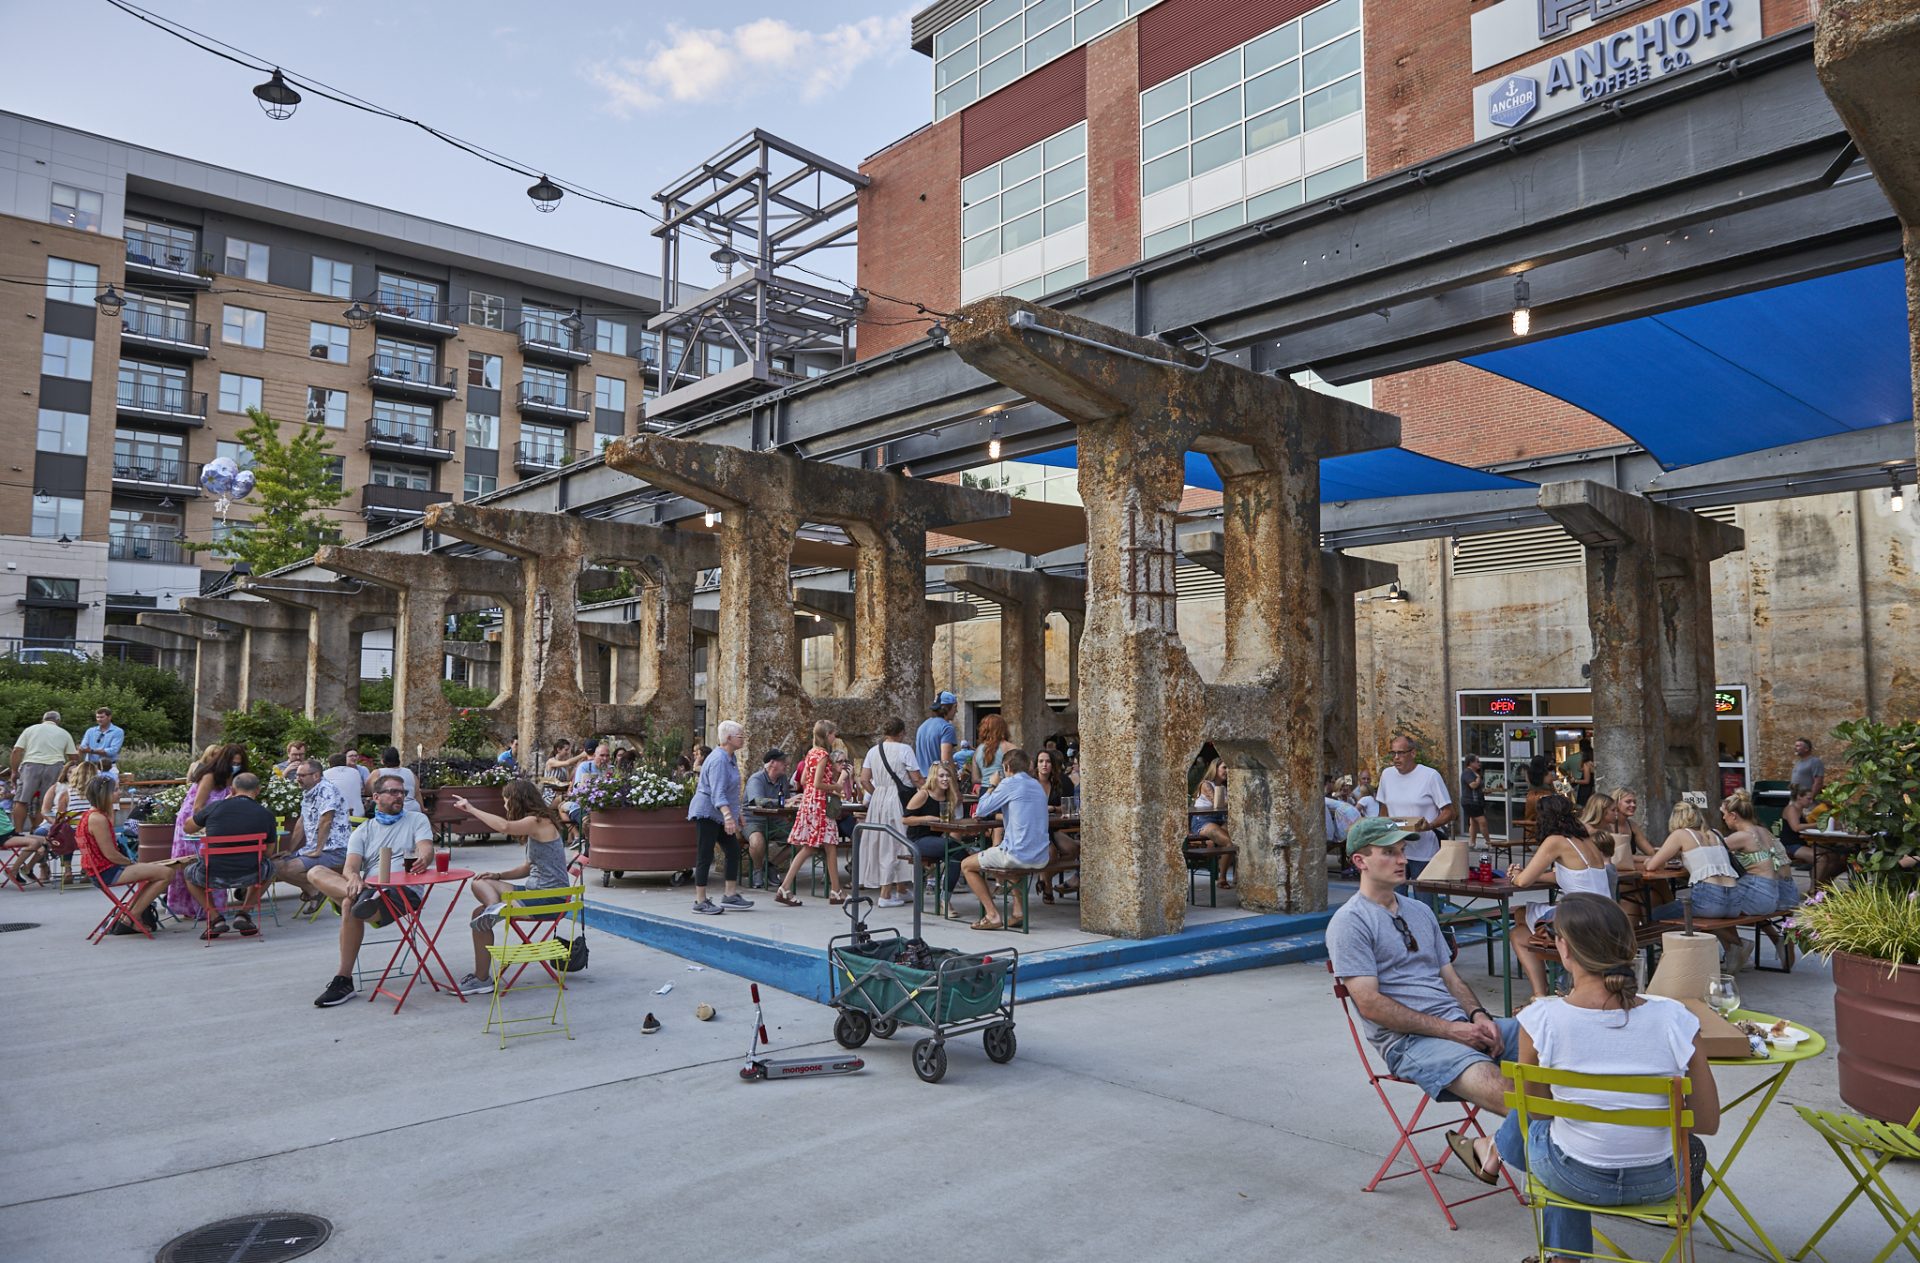 Placemaking in the Innovation Quarter ranges from an outdoor space for the community to gather to a 1.6 acre park in the middle of downtown Winston-Salem.